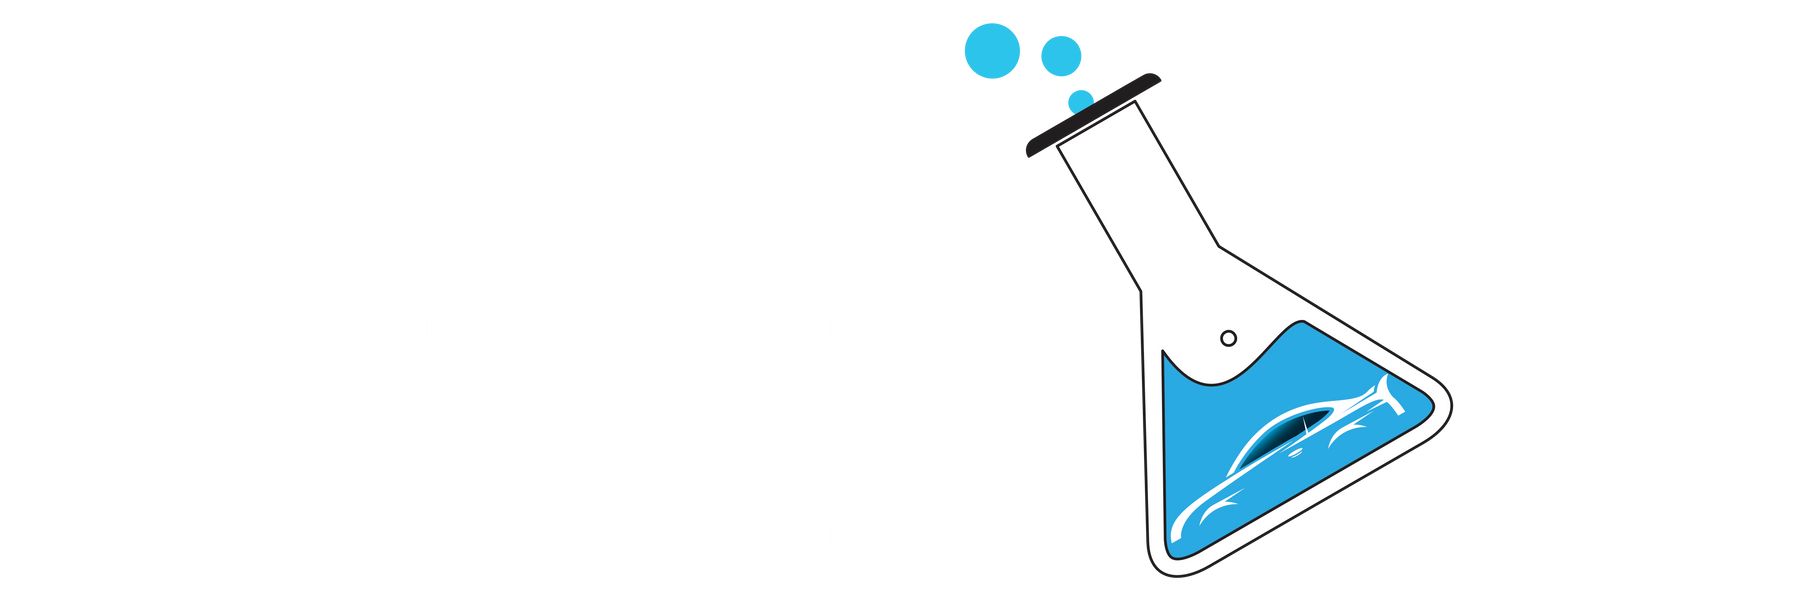 the lab logo on a black background